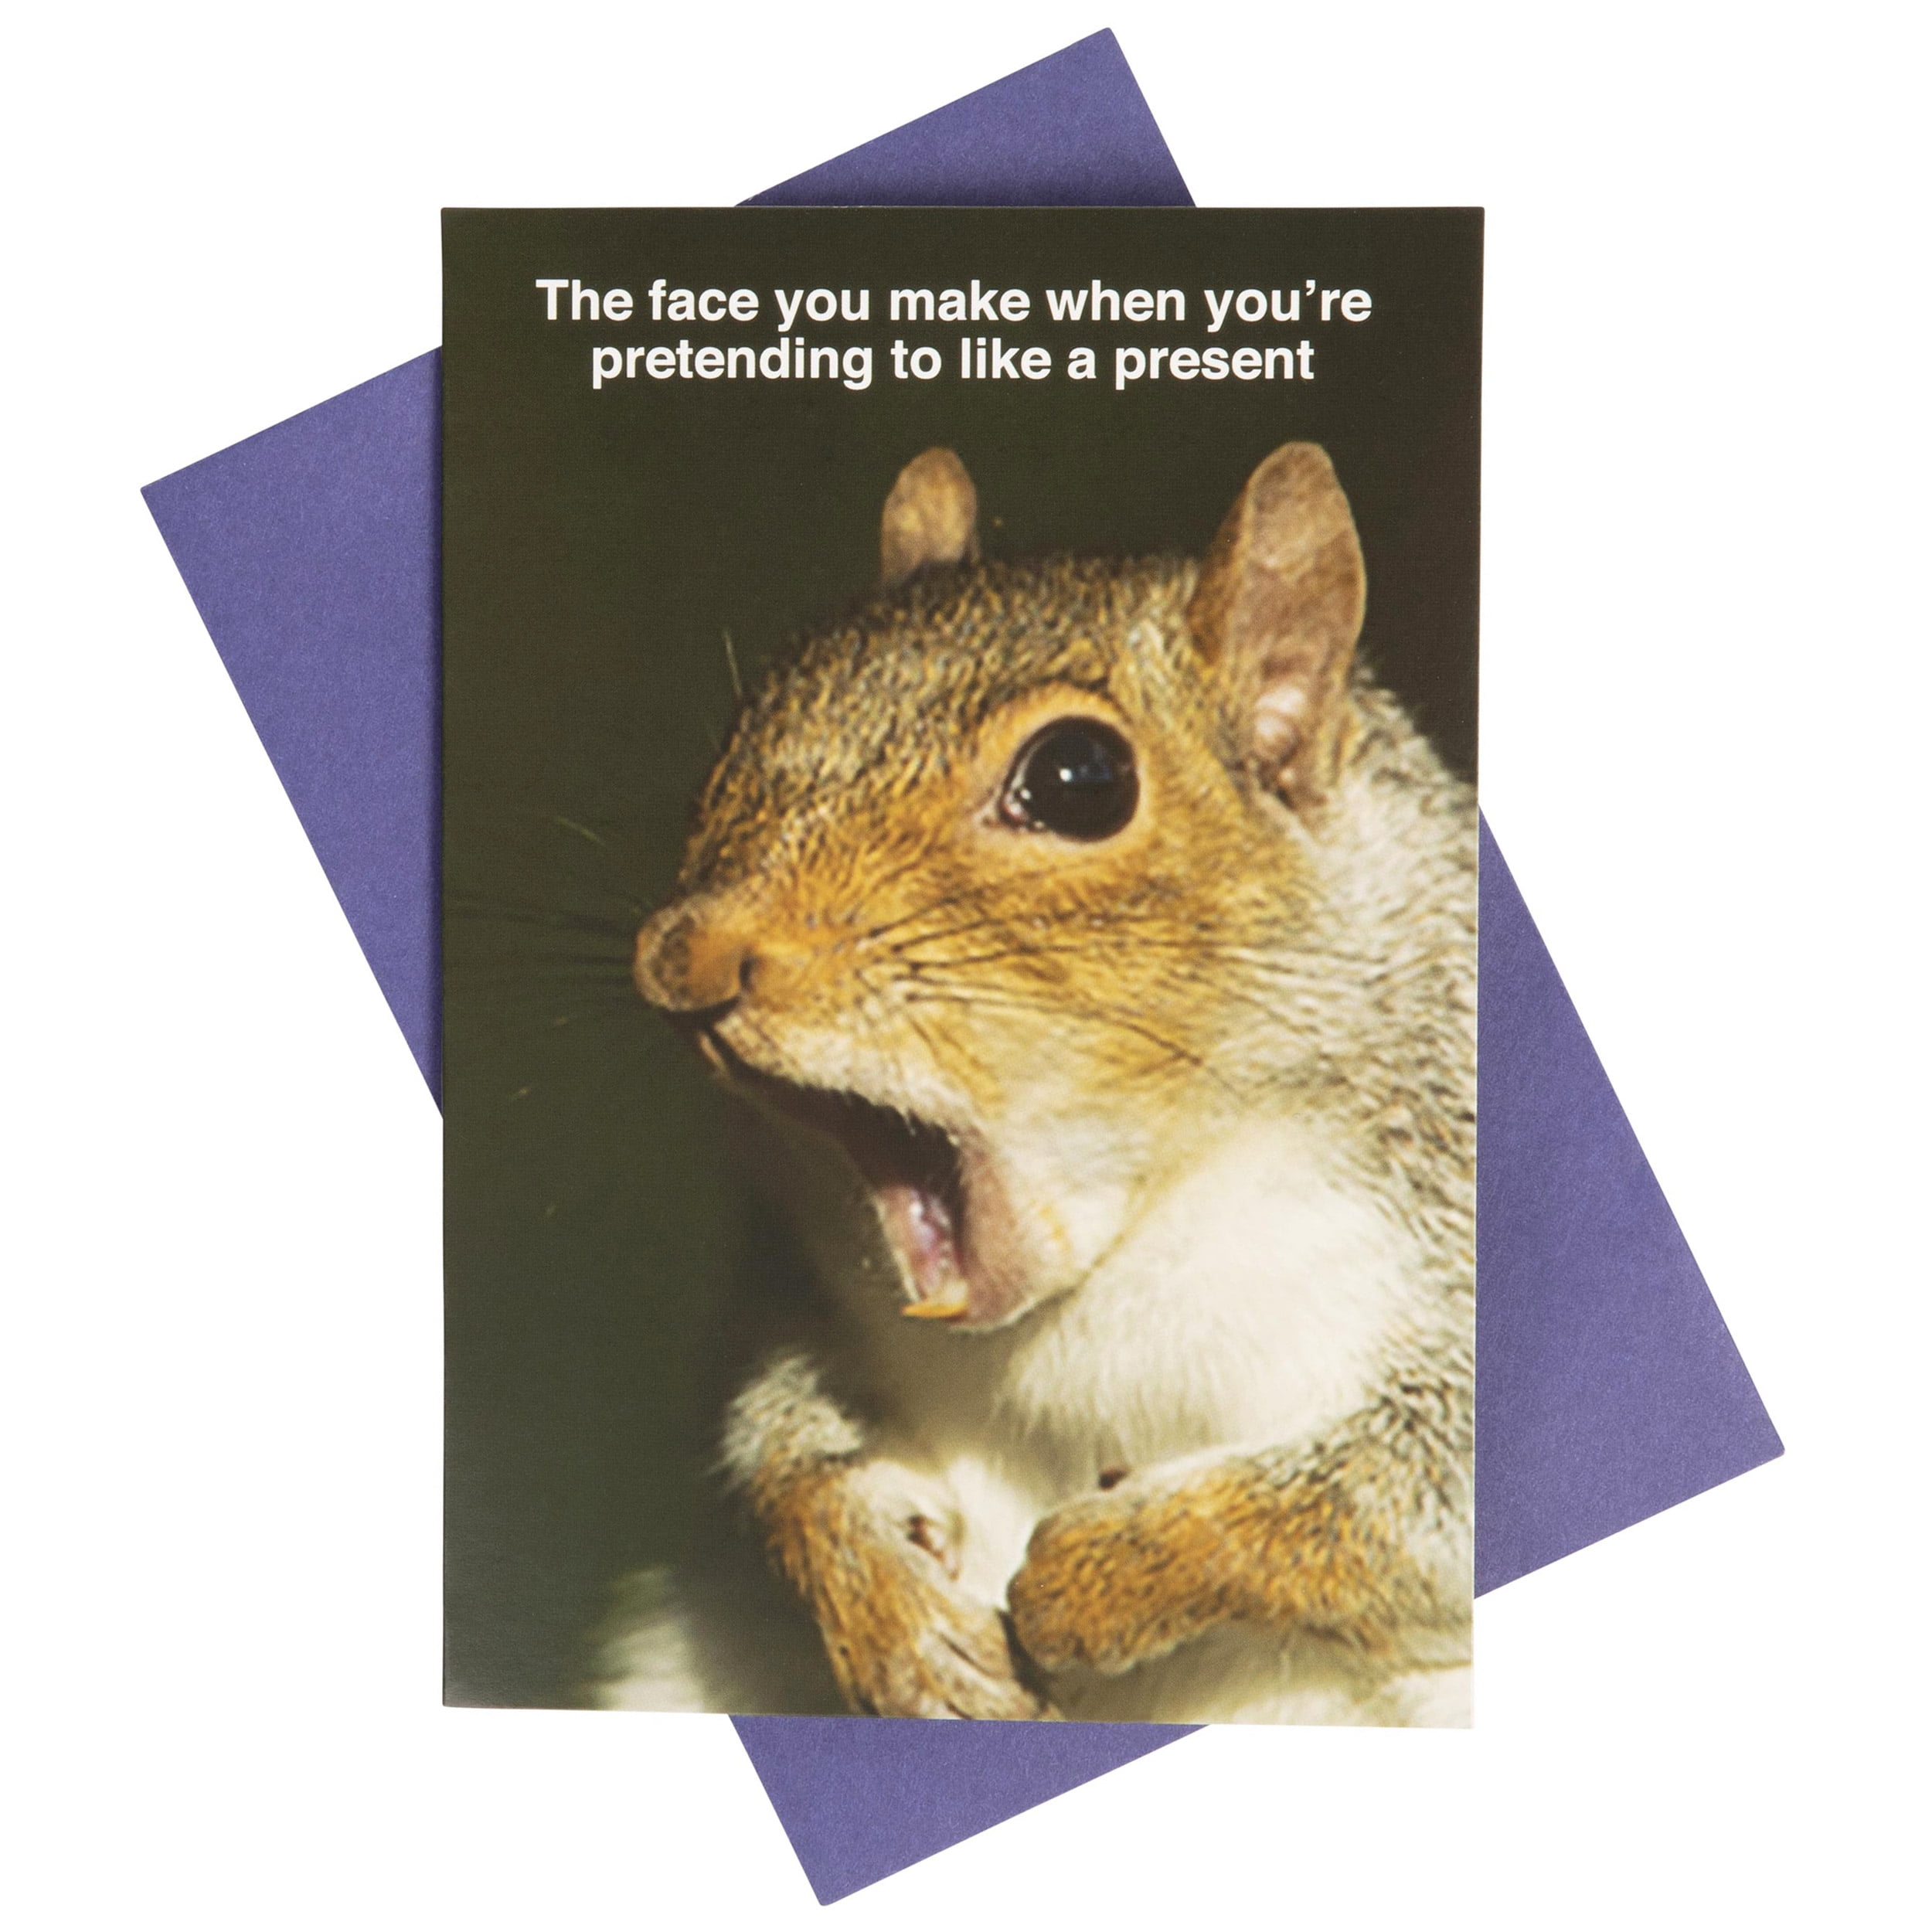 What Do You Meme?® Greeting Card - Birthday Card (Shocked Squirrel